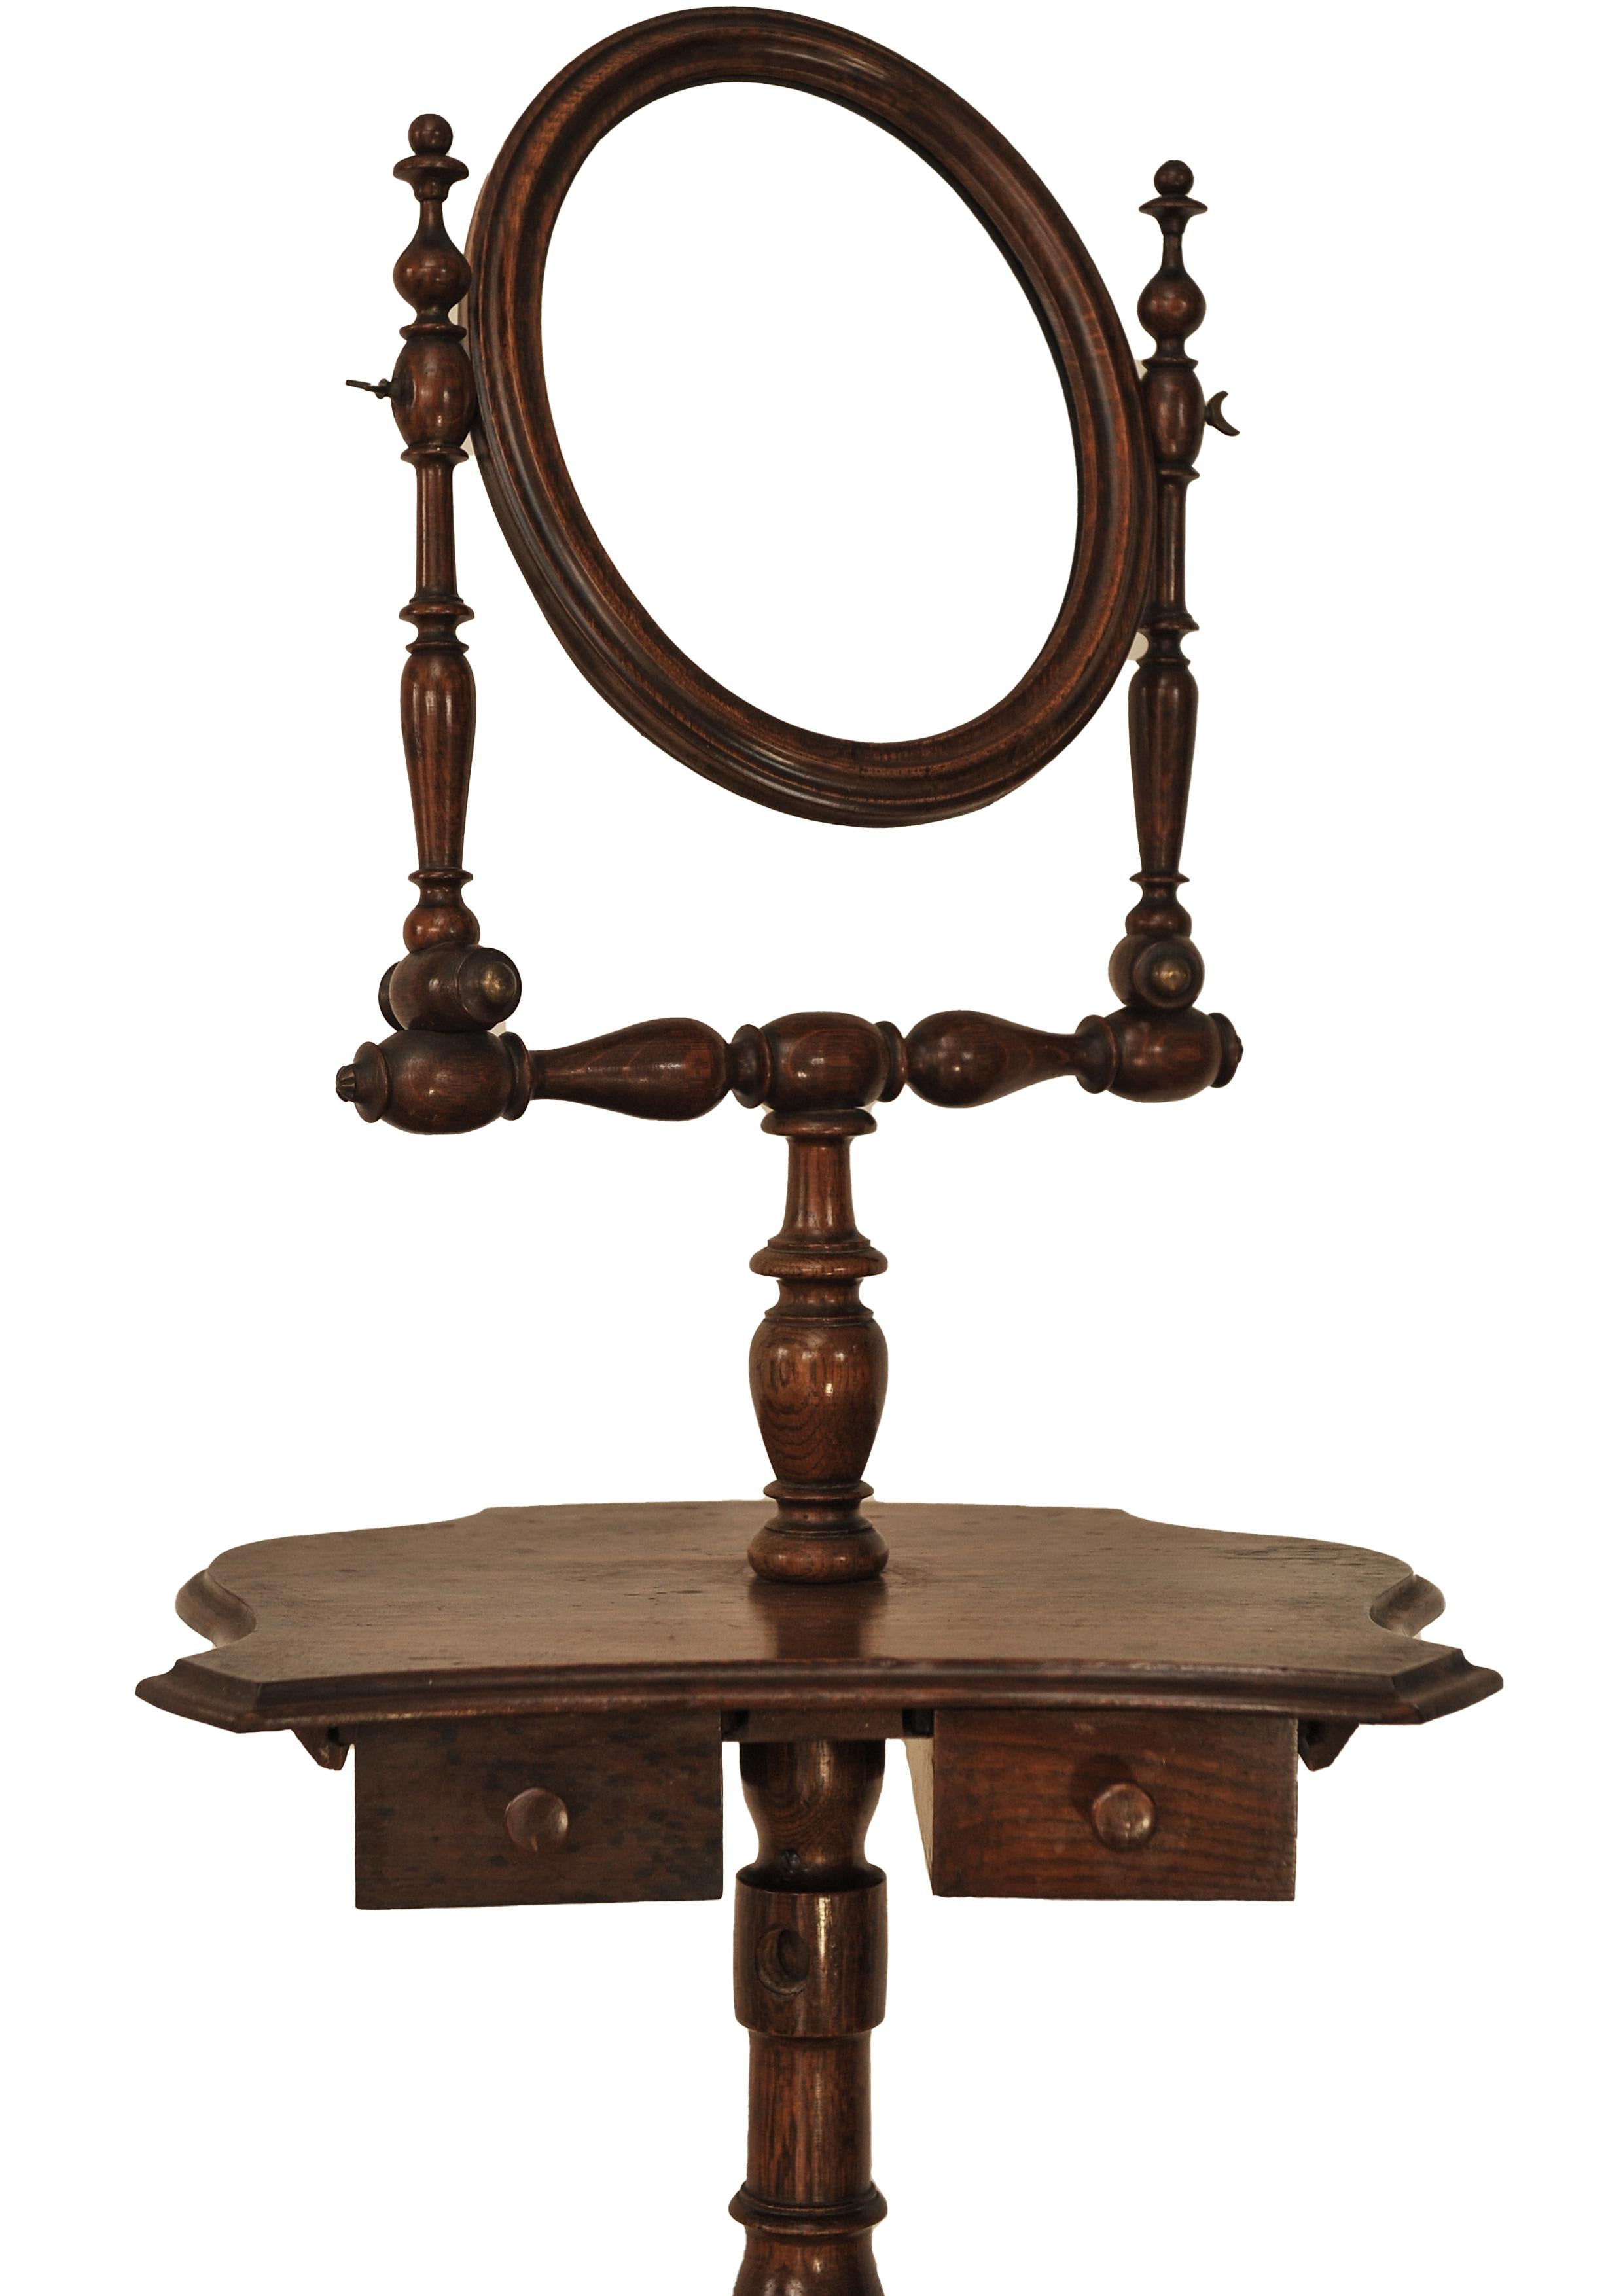 British Handmade Victorian Oak Shaving Stand With A Pivotable Oval Mirror on Turned Legs For Sale